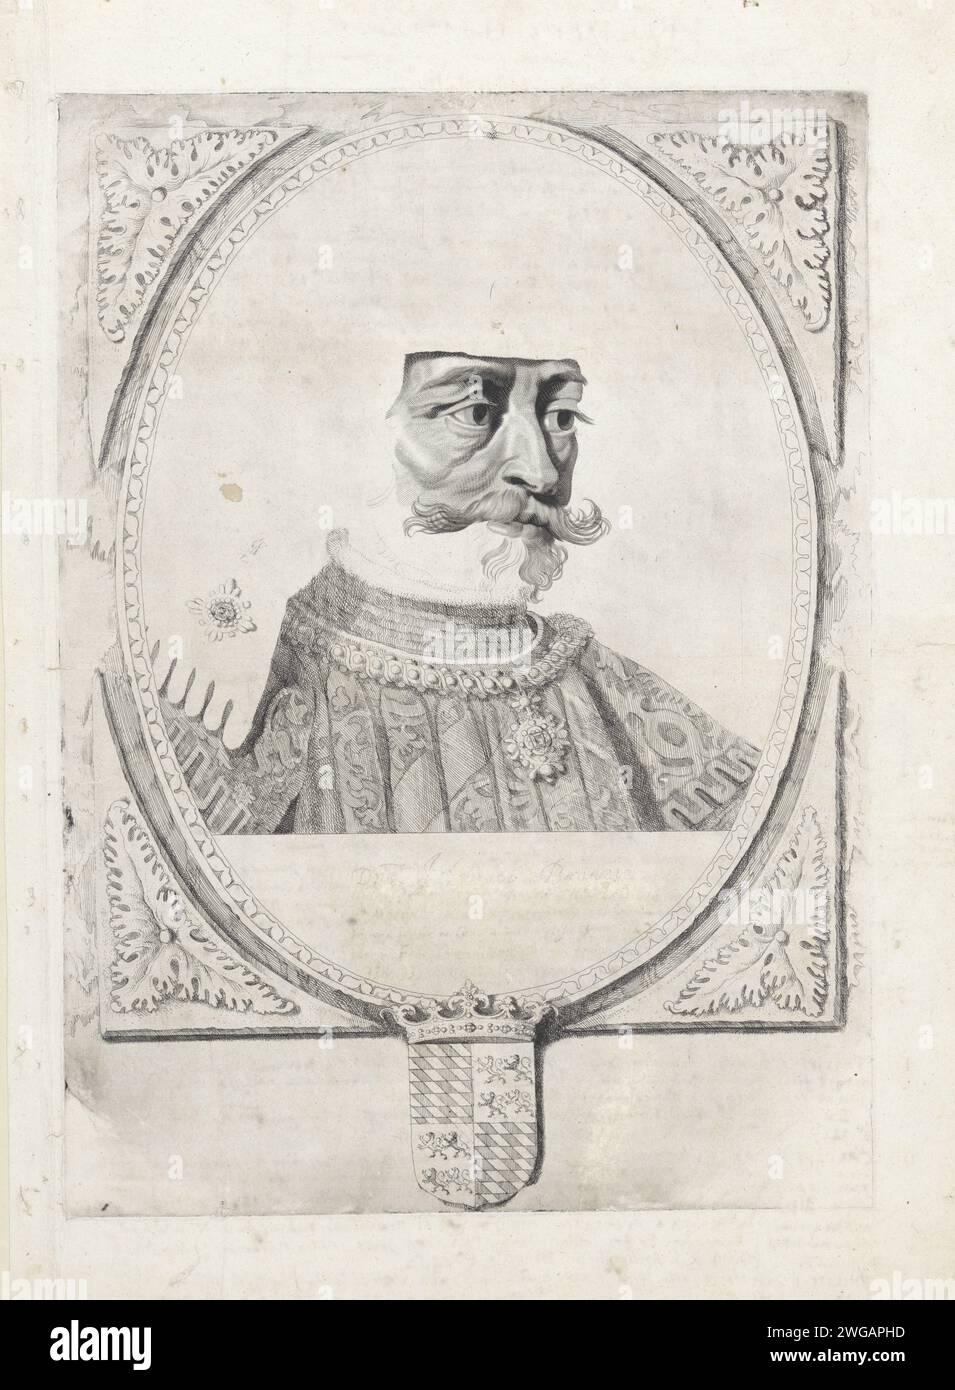 Portrait of Jan van Beieren, Cornelis Visscher (II), 1650 print Jan van Bavaria, count of Holland and Zeeland, nicknamed Jan without grace. A chain decorated with pearls and precious stones around its neck. The frame is decorated with a weapon. Haarlem paper engraving / etching nobility and patriciate; chivalry, knighthood. necklace (+ men's clothes) Stock Photo